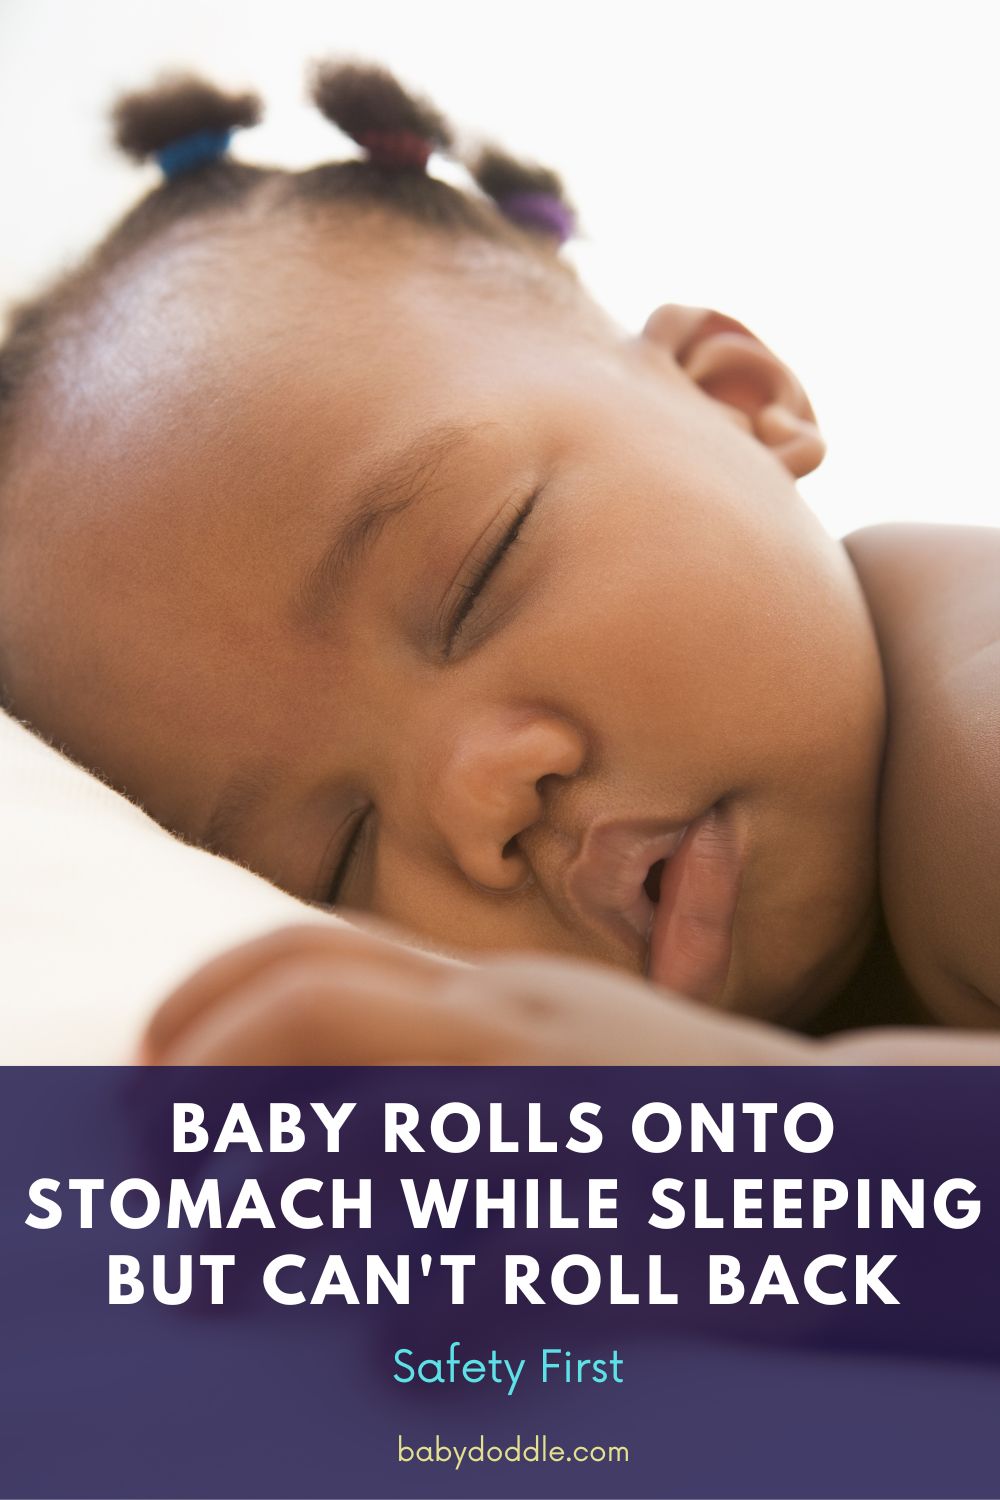 Baby rolls onto stomach while sleeping but can't roll back